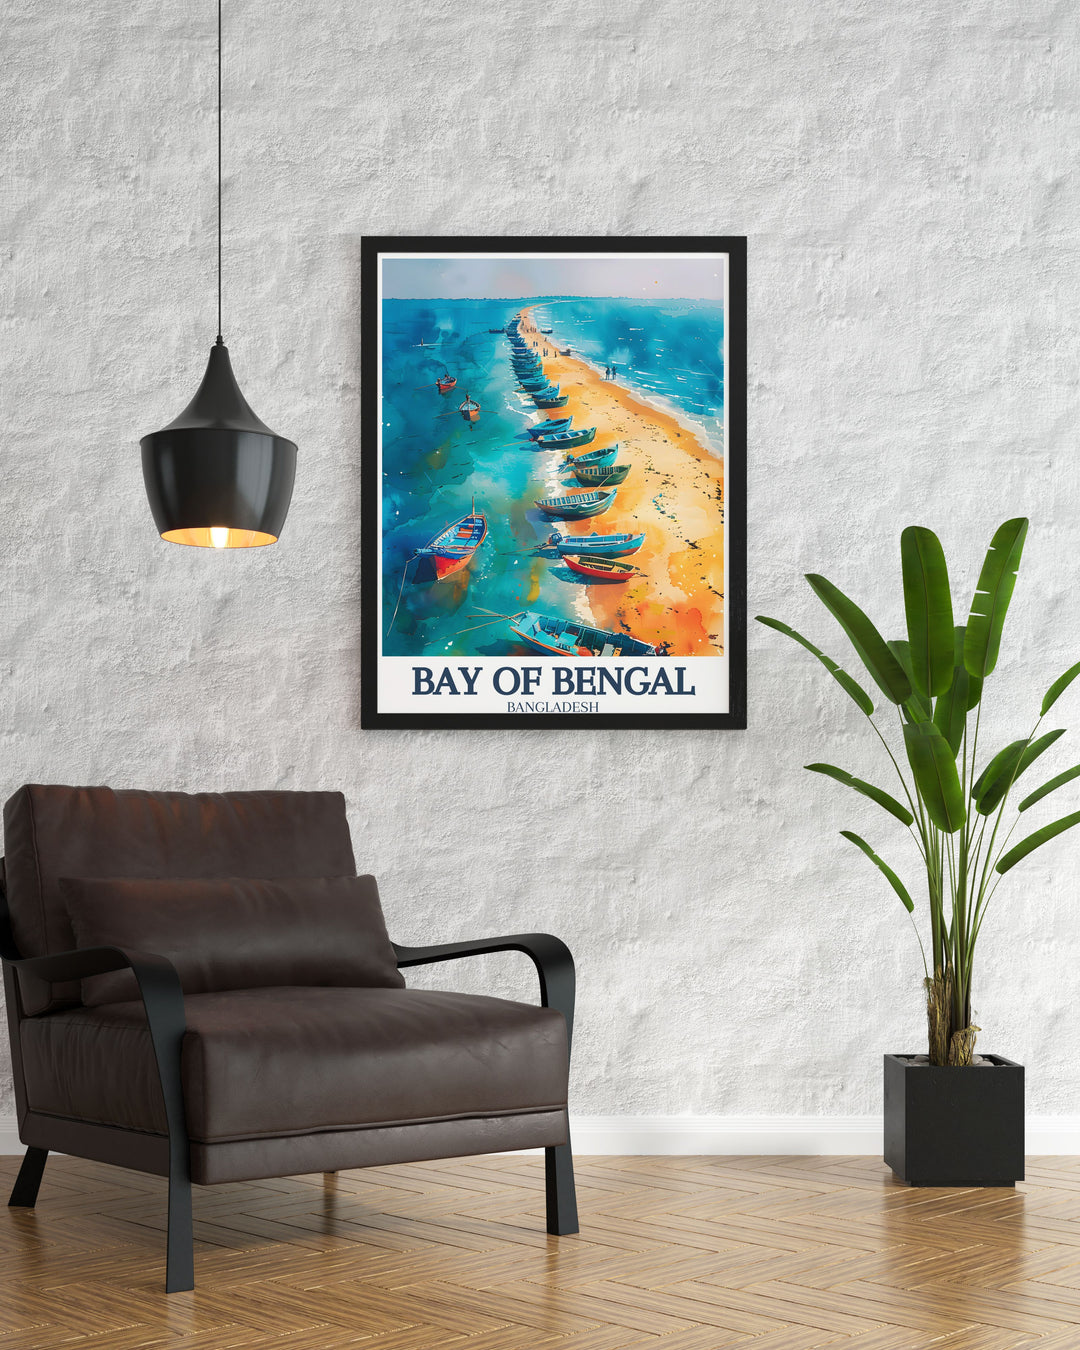 Elegant Buriganga river Dhaka Bay of Bengal poster capturing the rich history and vibrant culture of Bangladesh perfect for adding a touch of elegance to any room